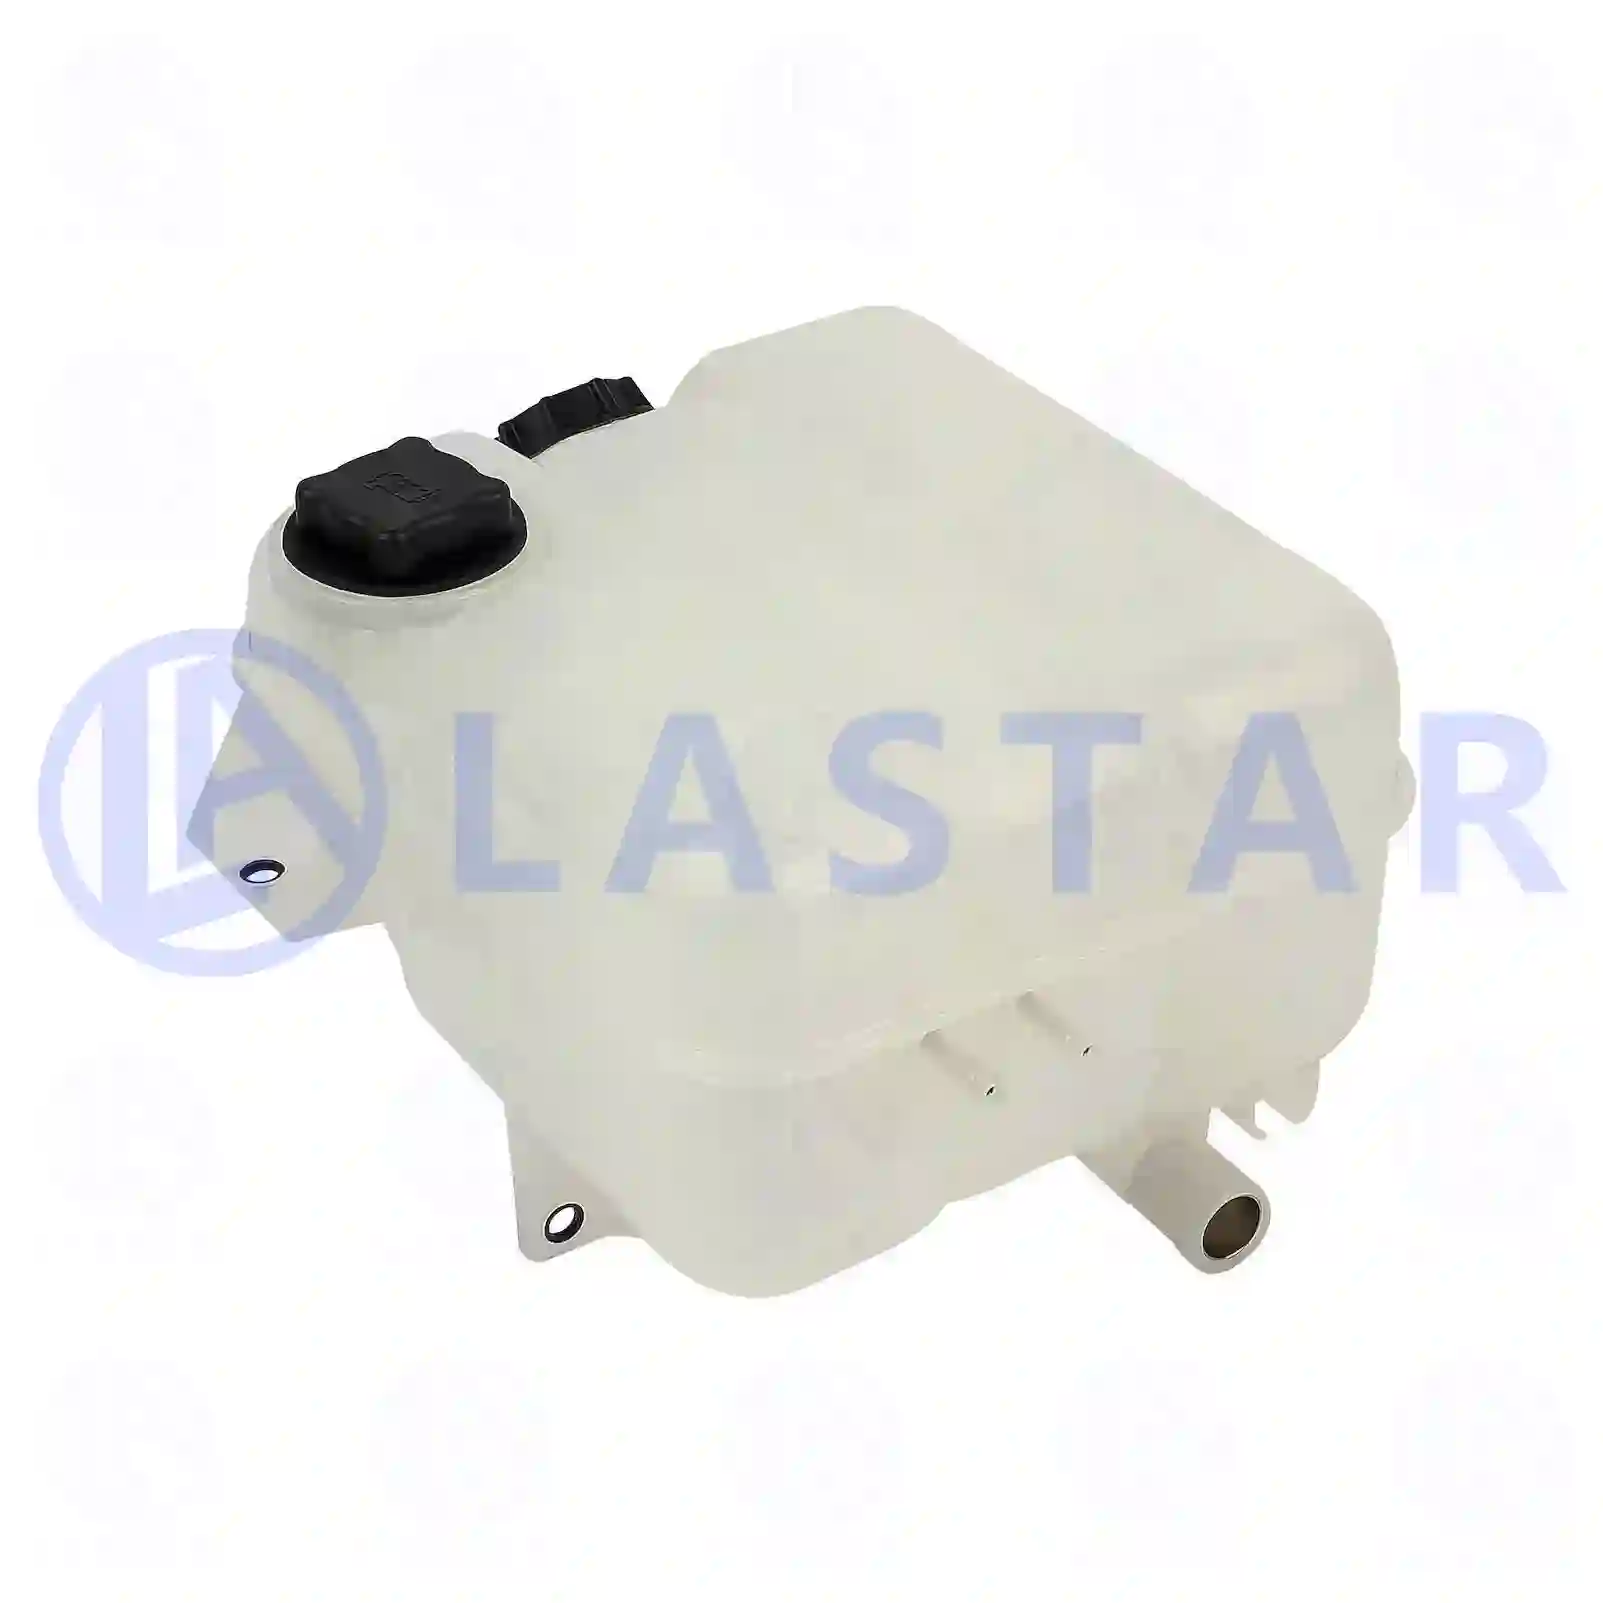 Expansion tank, with cover, without sensor, 77709284, 7401676400, 7401676576, 1676400, 1676576, ZG00368-0008 ||  77709284 Lastar Spare Part | Truck Spare Parts, Auotomotive Spare Parts Expansion tank, with cover, without sensor, 77709284, 7401676400, 7401676576, 1676400, 1676576, ZG00368-0008 ||  77709284 Lastar Spare Part | Truck Spare Parts, Auotomotive Spare Parts